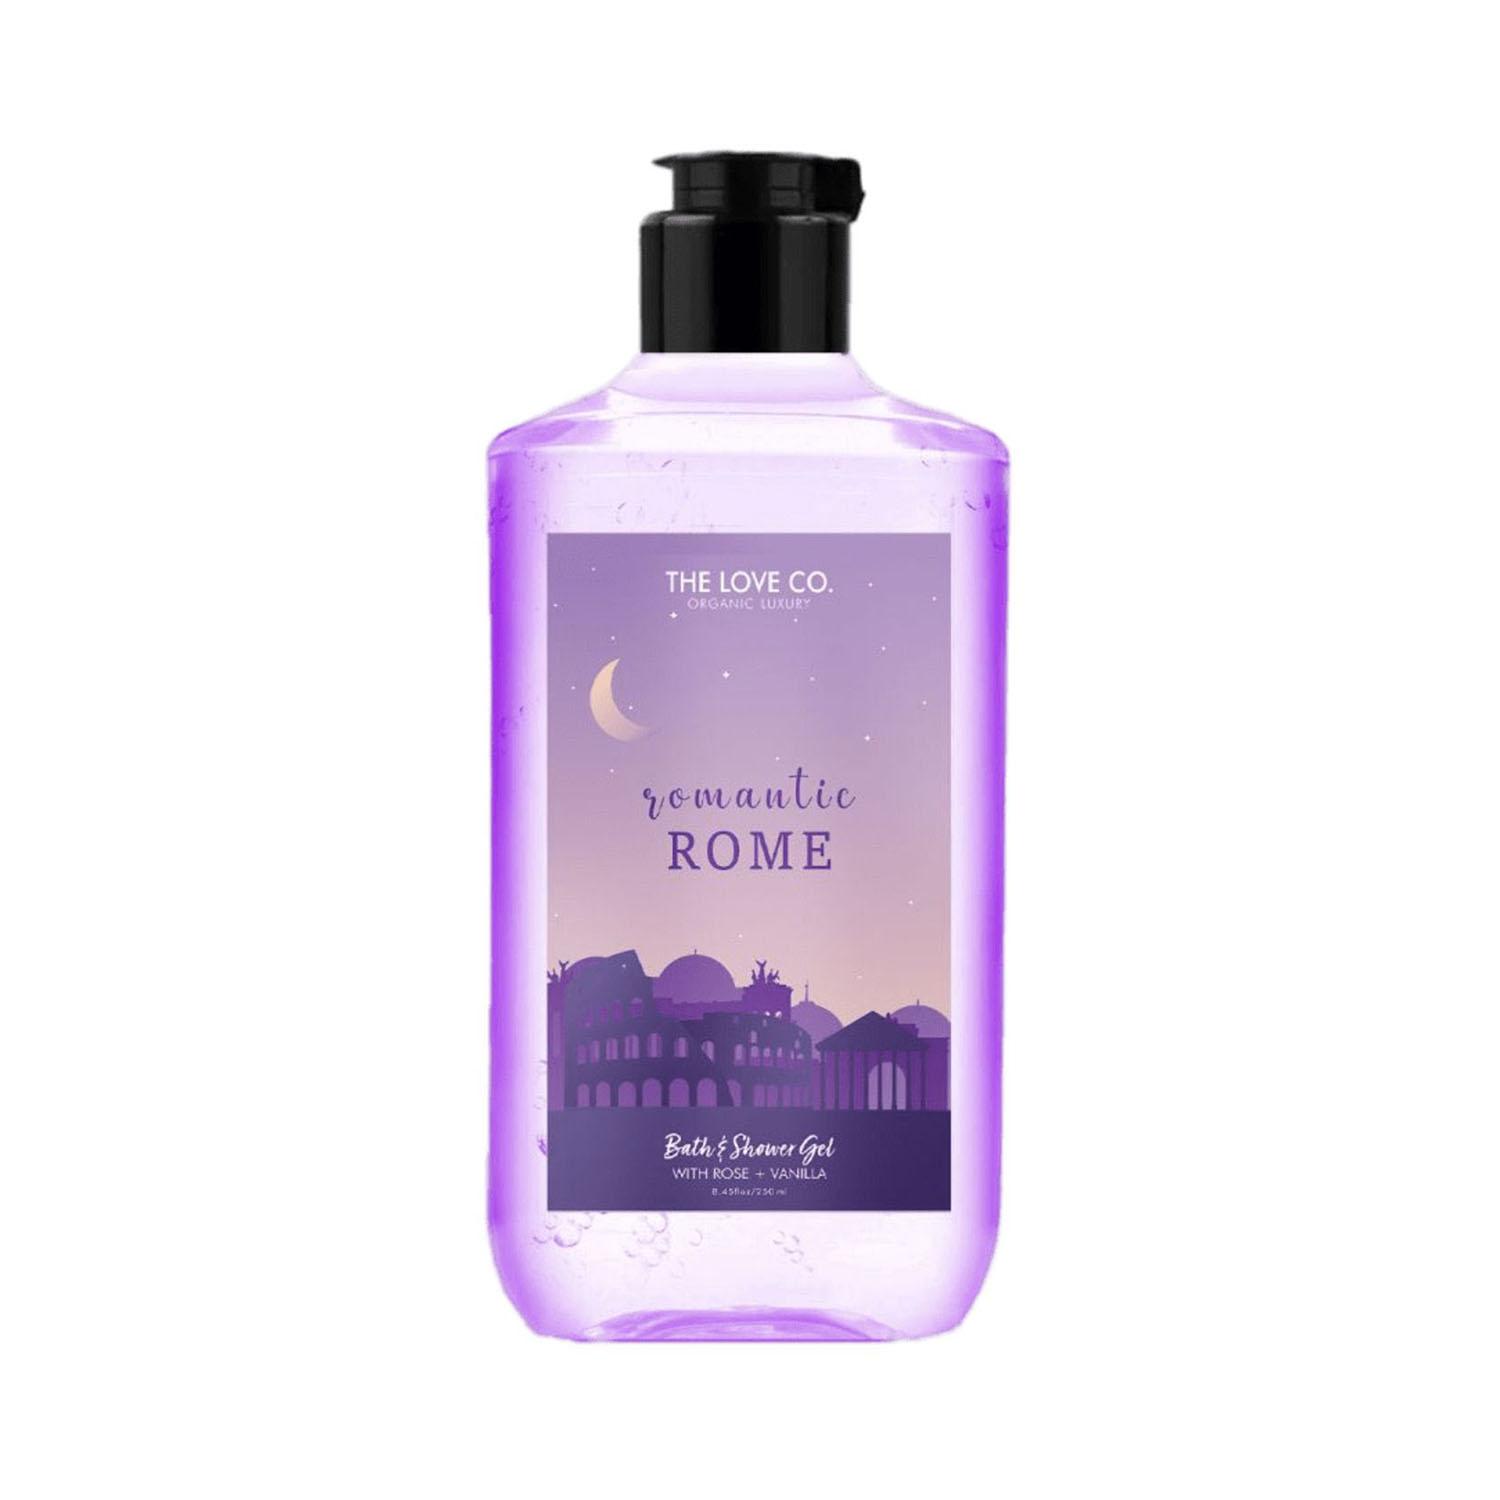 THE LOVE CO. | THE LOVE CO. Romantic Rome Body and Shower Gel (250ml)